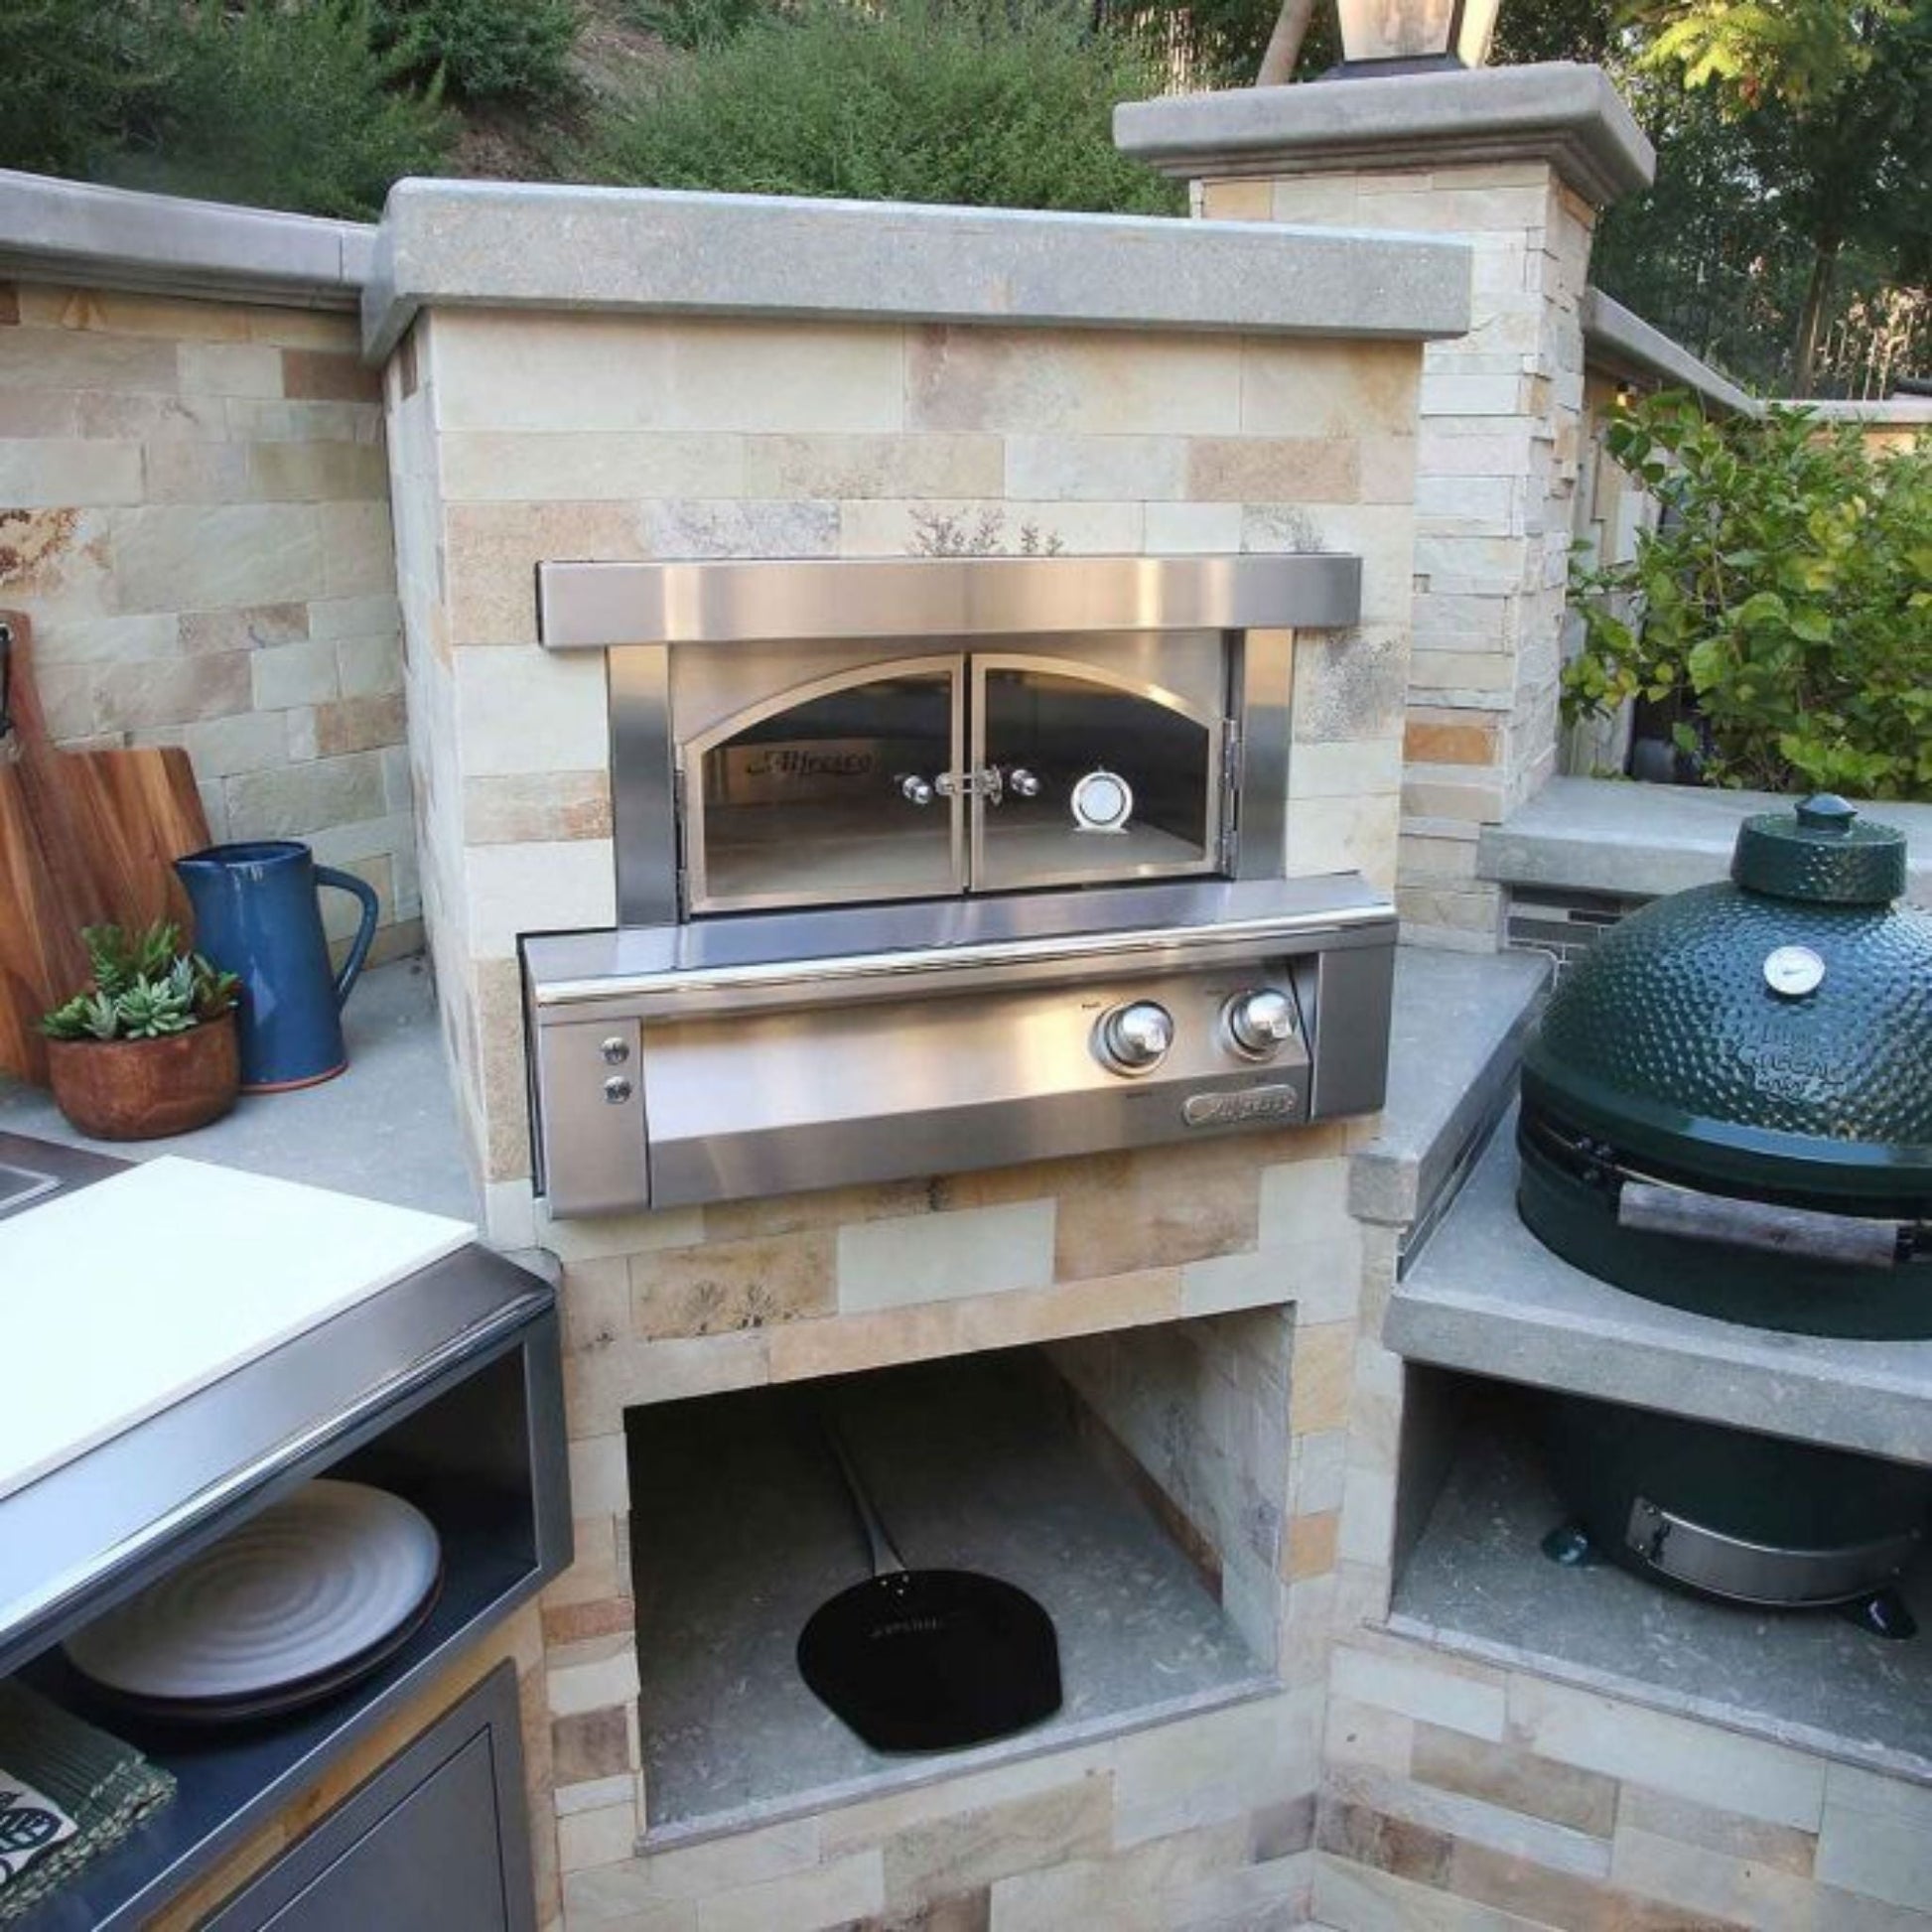 Alfresco 30" Jet Black Gloss Natural Gas Pizza Oven for Built-in Installations